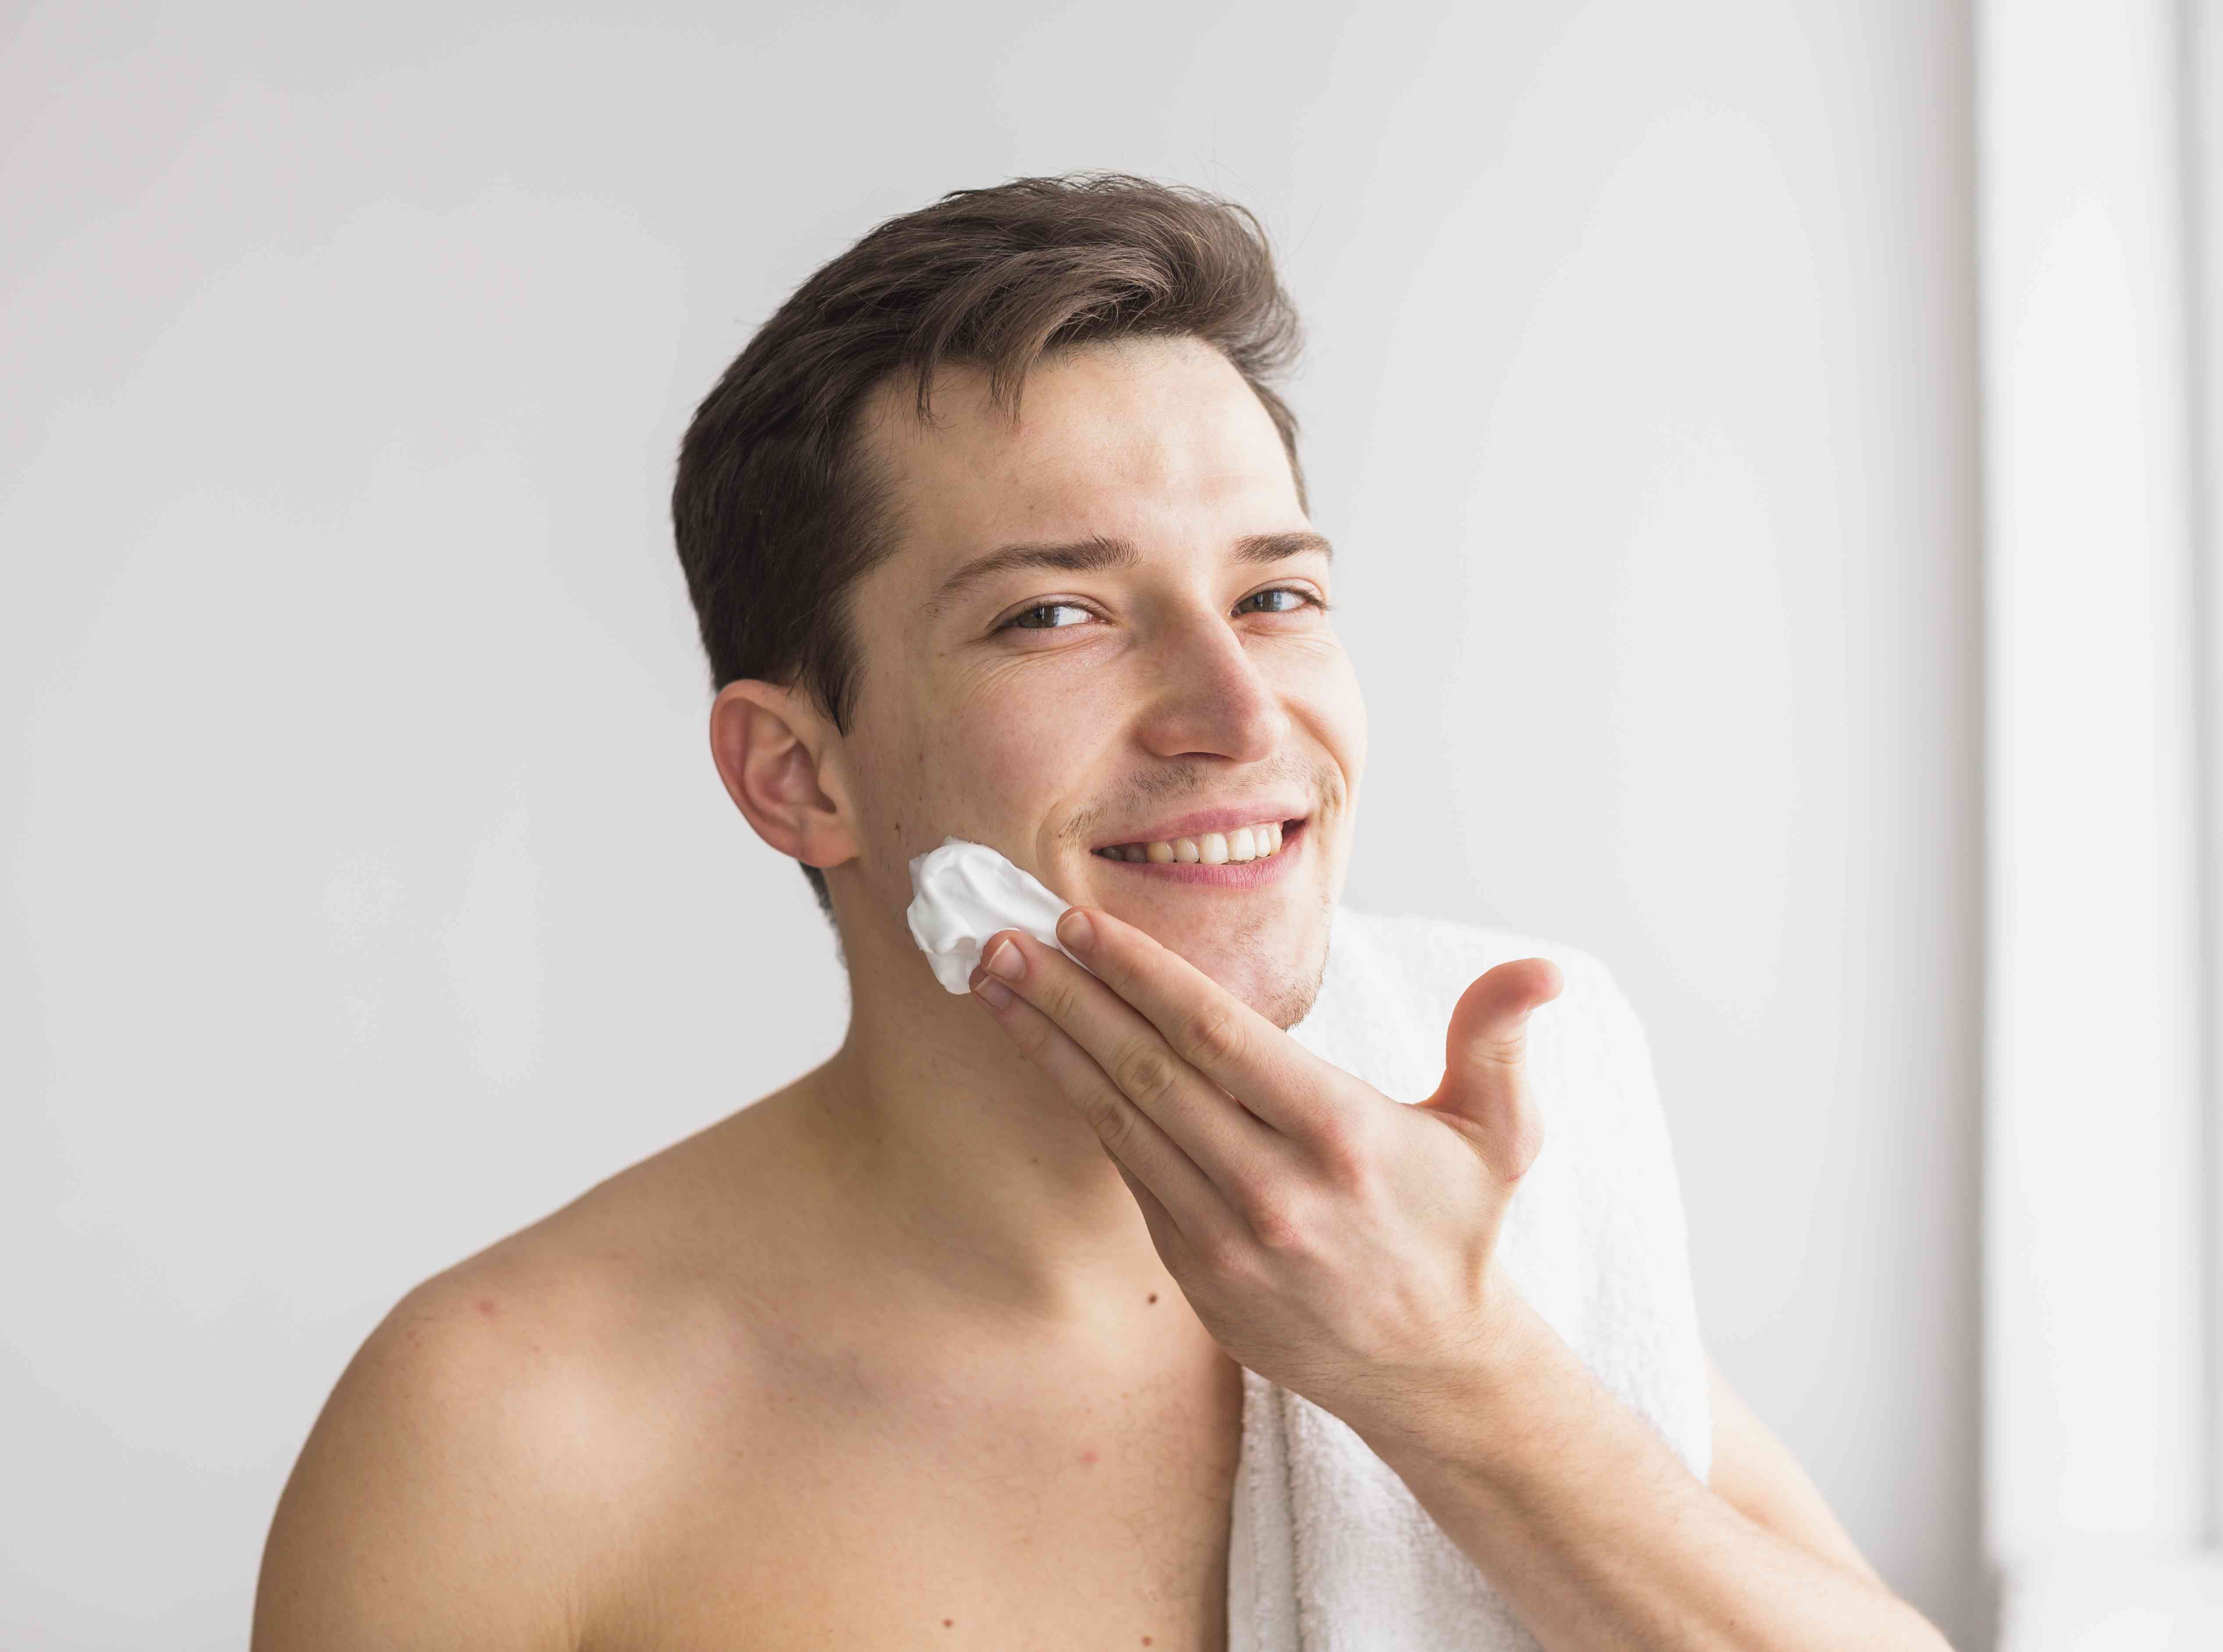 Not Only Women, Here's a Series of Skin Care for Men that Can Brighten the Face